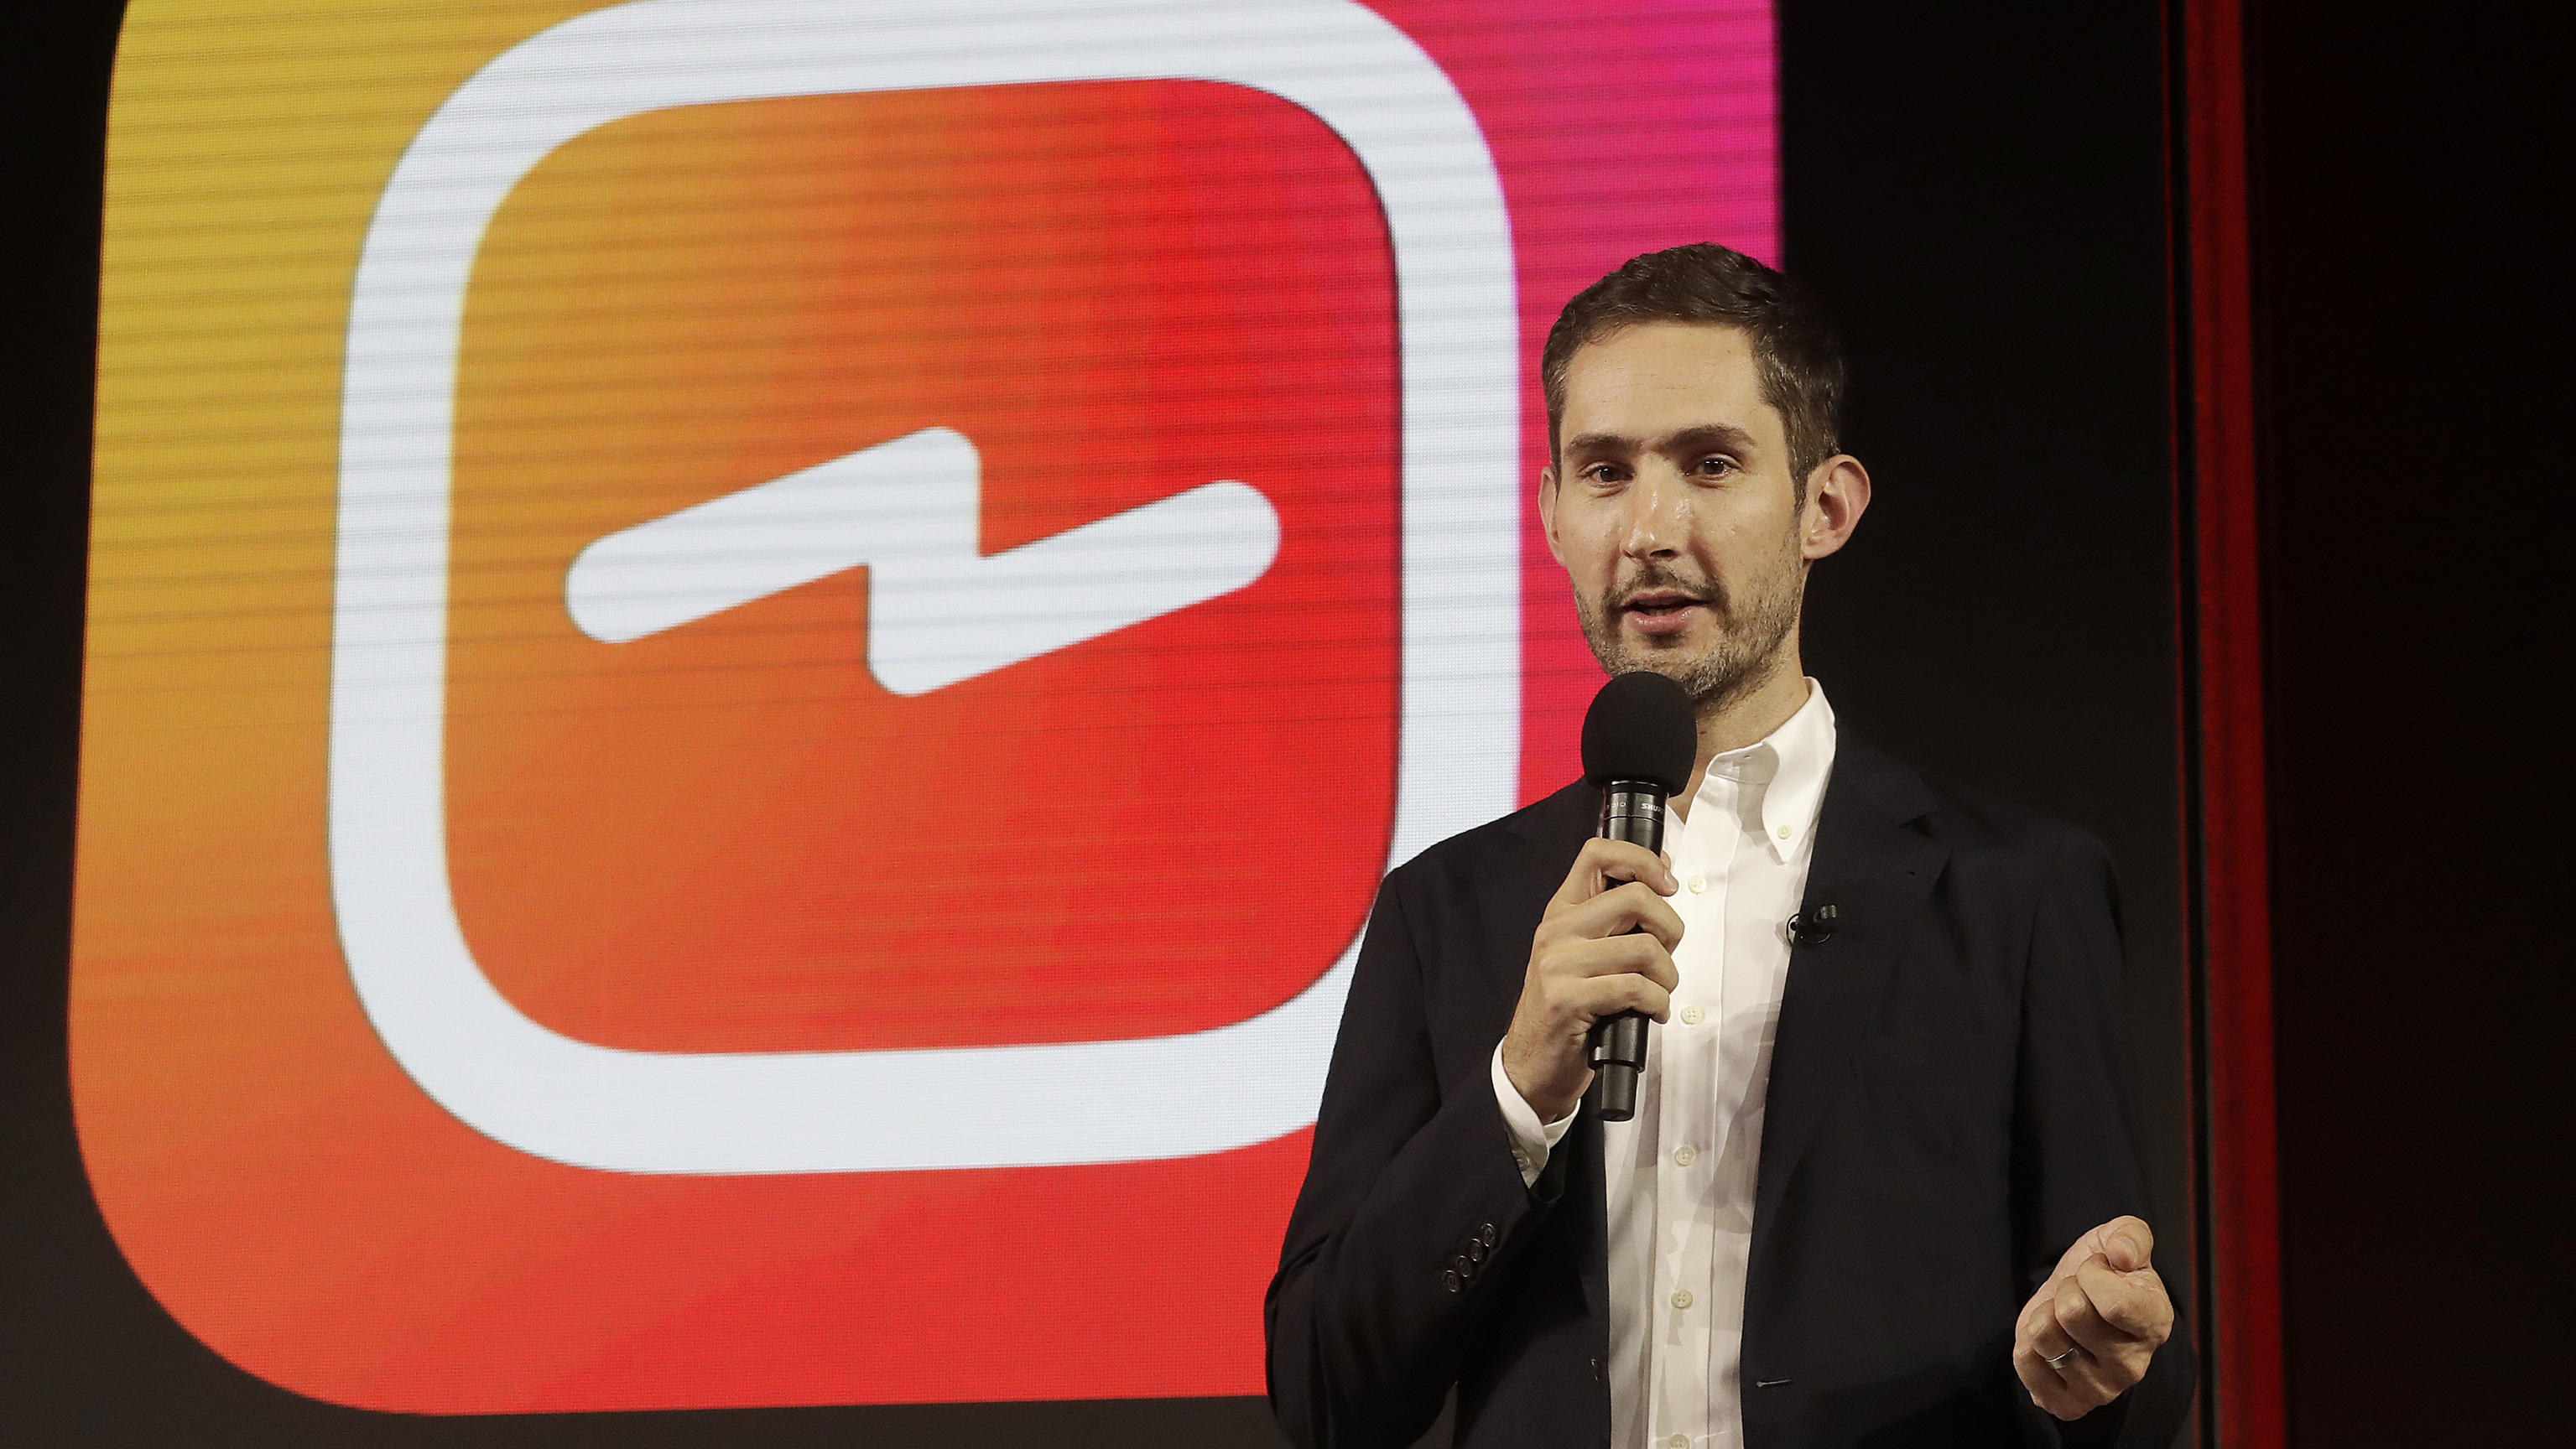 In this Tuesday, June 19, 2018, file photo, Kevin Systrom, CEO and co-founder of Instagram, prepares for an announcement about IGTV in San Francisco. In a statement late Monday, Sept. 24, 2018, Systrom said in a statement that he and Mike Krieger, In